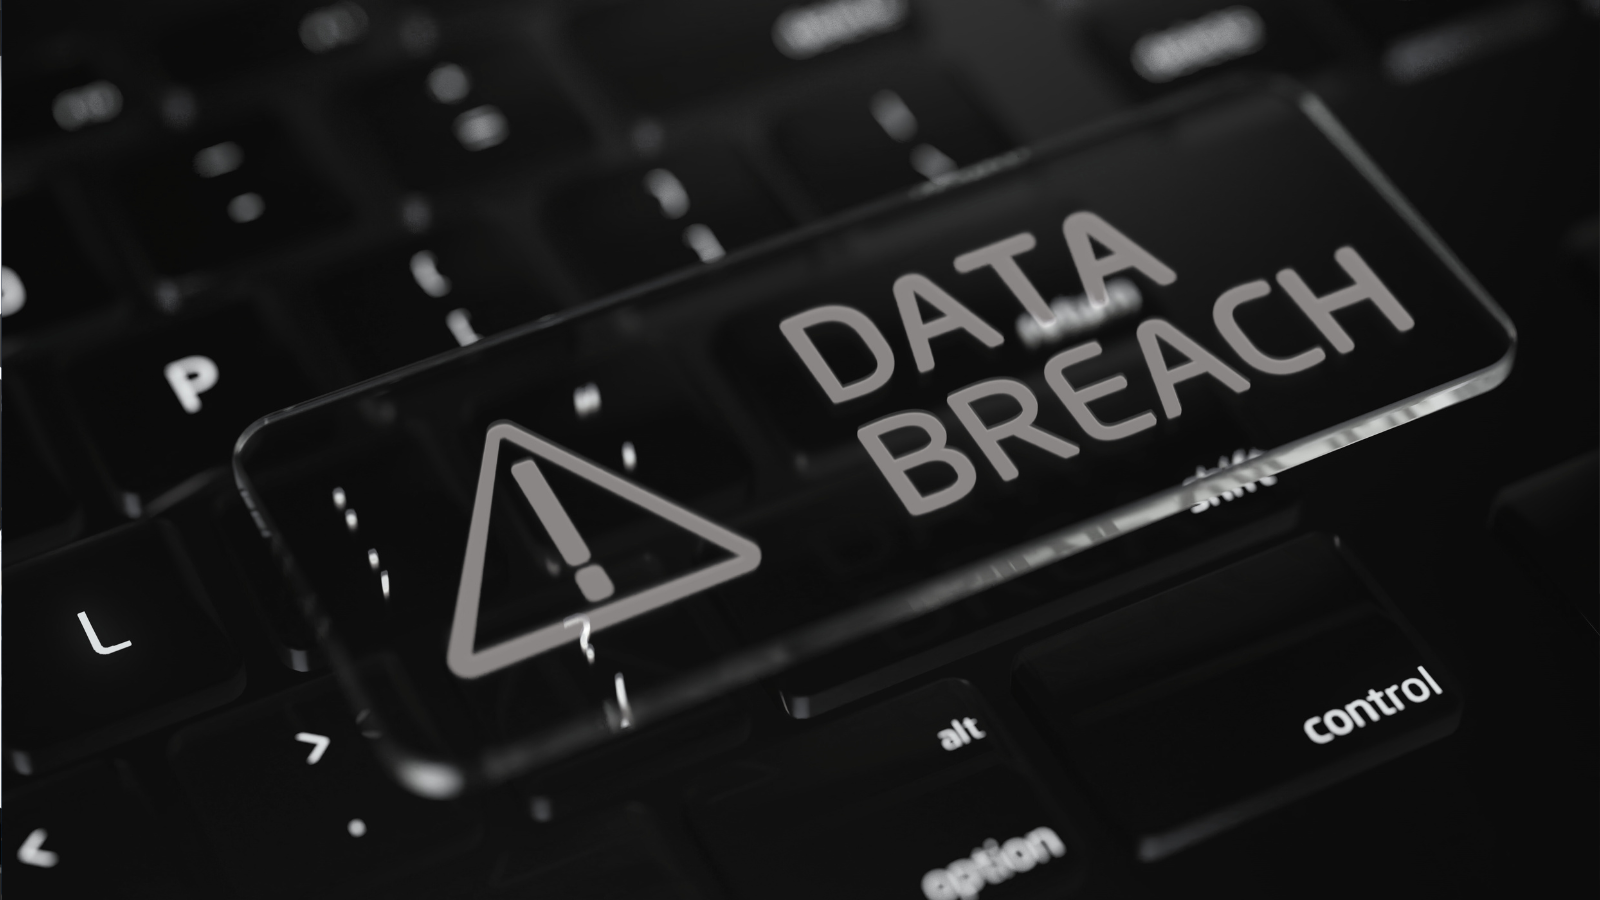 Exclamation point warning of a data breach